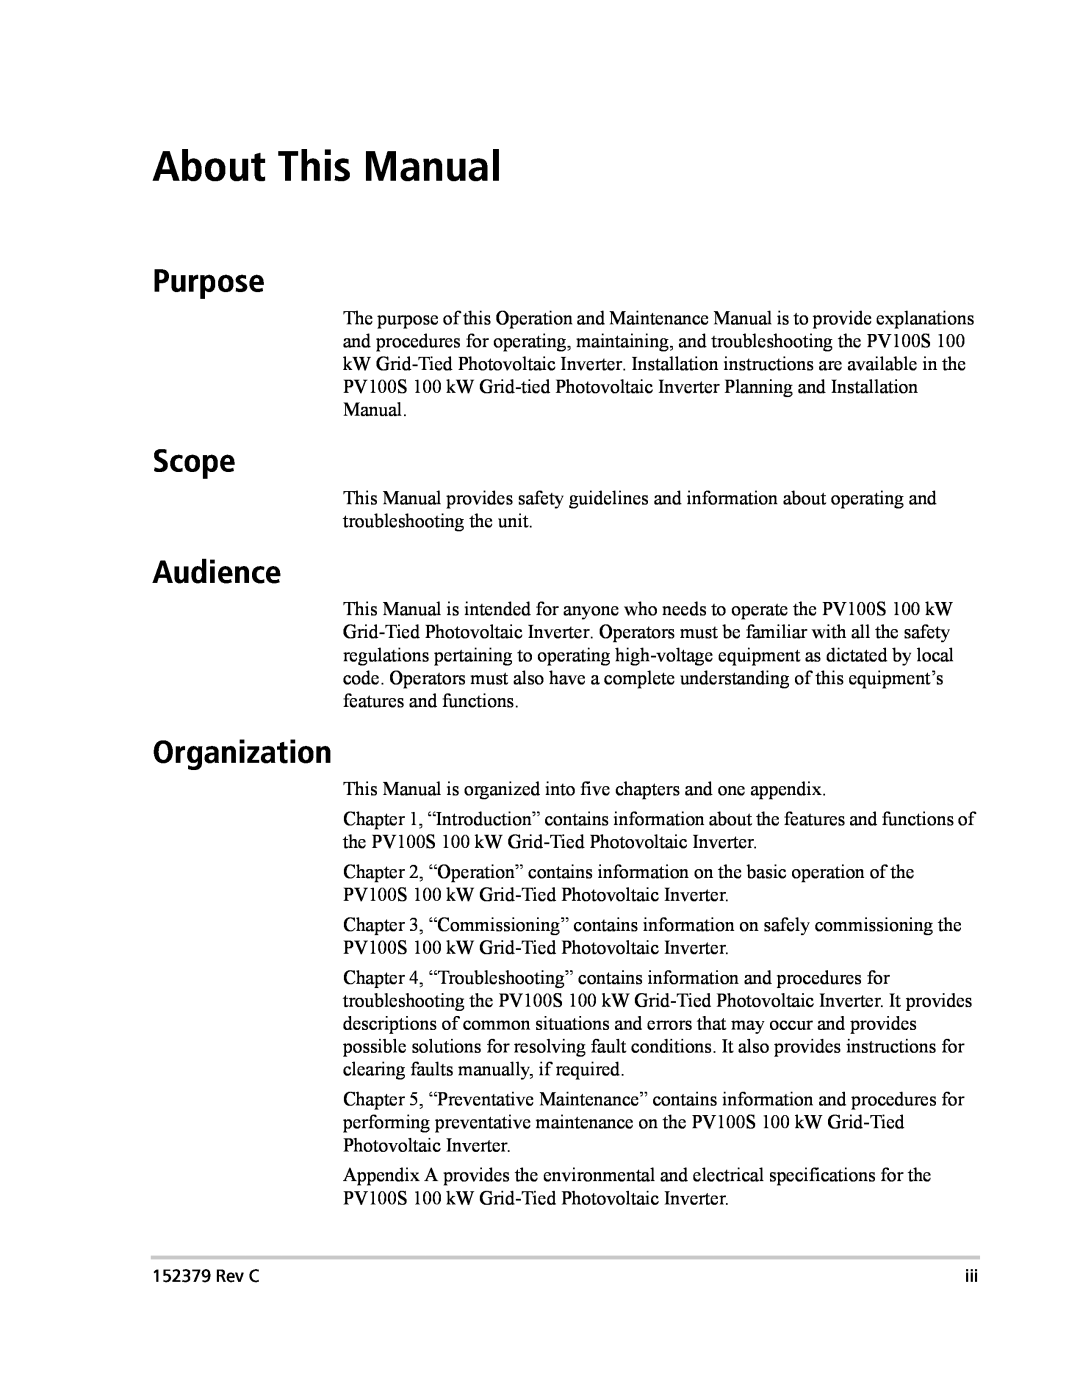 Xantrex Technology PV100S-208 manual About This Manual, Purpose, Scope, Audience, Organization 